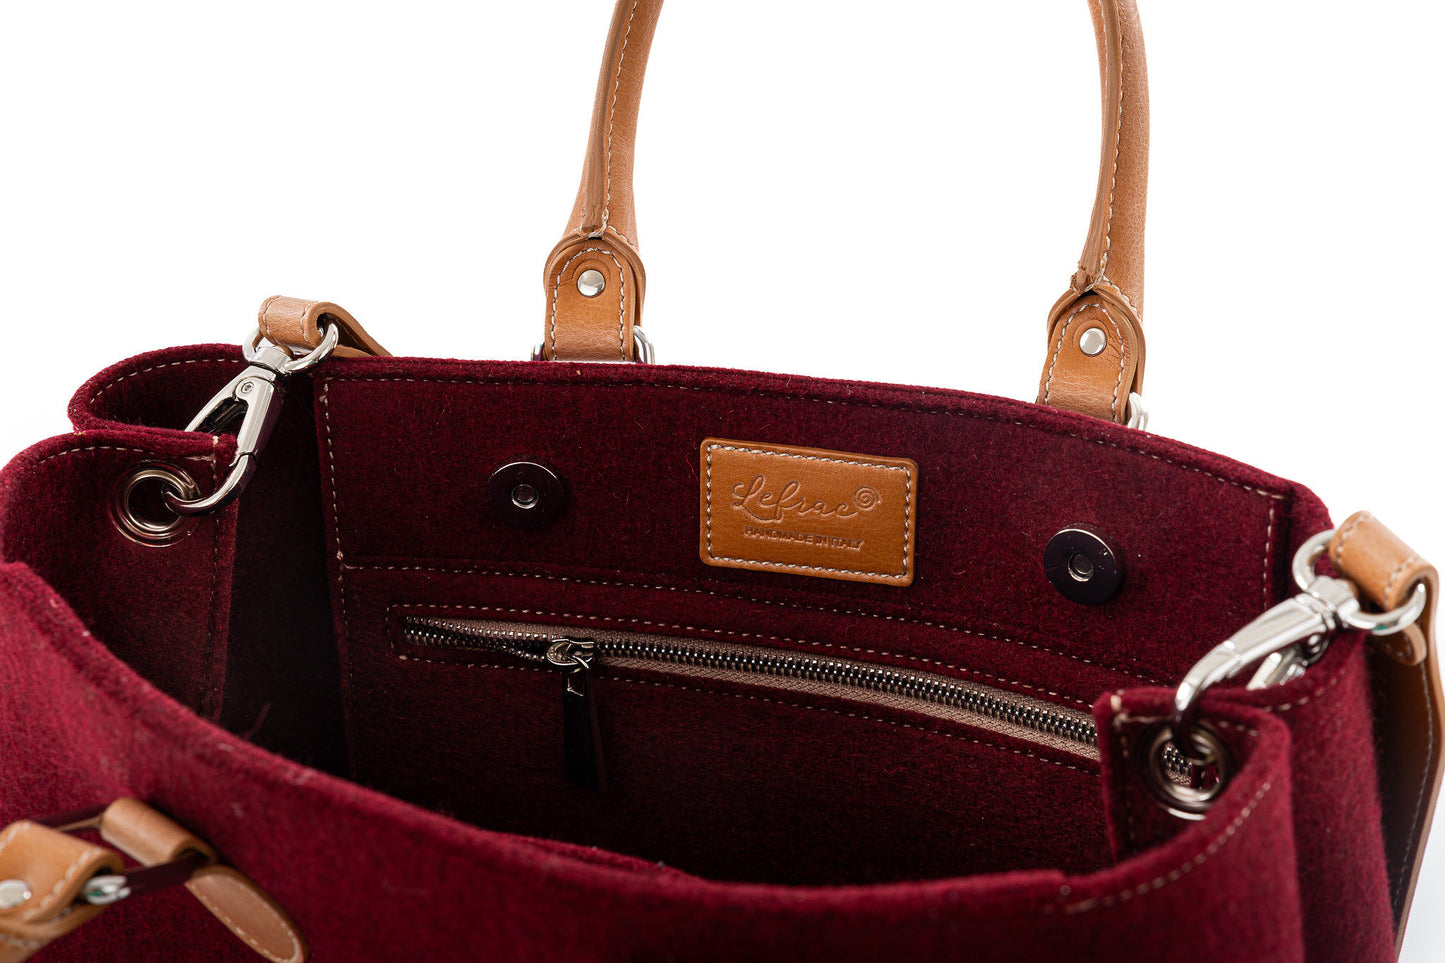 Merino wool felt in 3mm thickness. Vegan leather handles made from organic materials. Detachable Vegan leather shoulder strap with snap hooks. 2 inside pockets. Measurements approx.: 30cm H 33cm W 15cm D/ 11,81 H 12,99” W 5,90” D. Handles drop: 14,5 cm / 5,70”. Pendant plate with Lefrac logo.